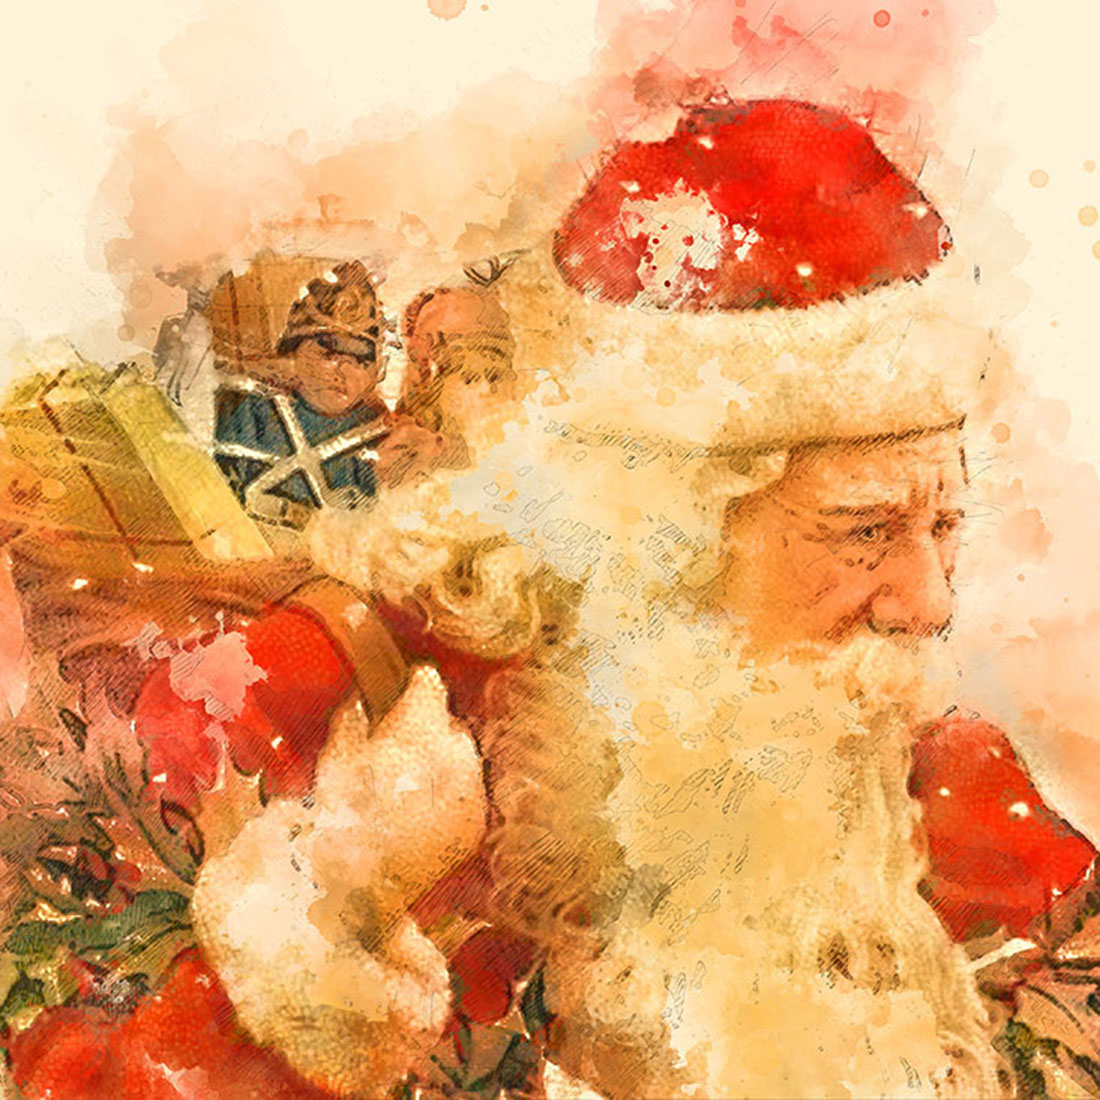 Christmas Santa Graphics with Artistic Style cover image.